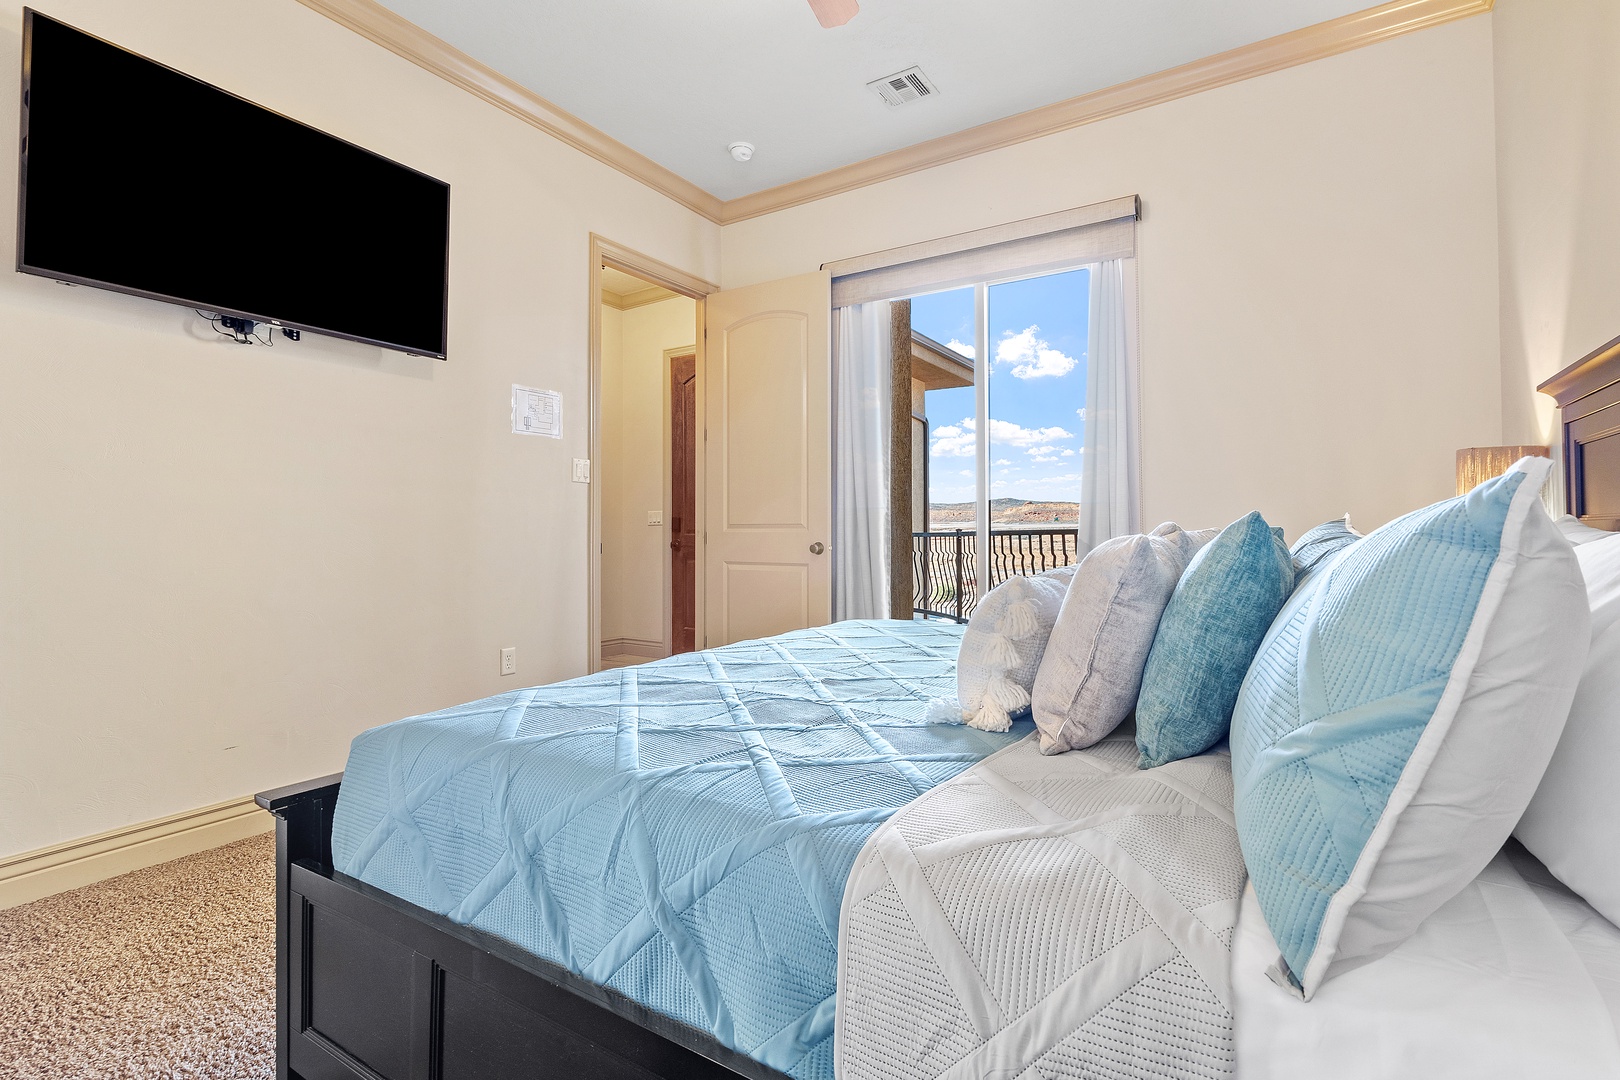 The serene king suite offers a private en suite, Smart TV, & balcony access